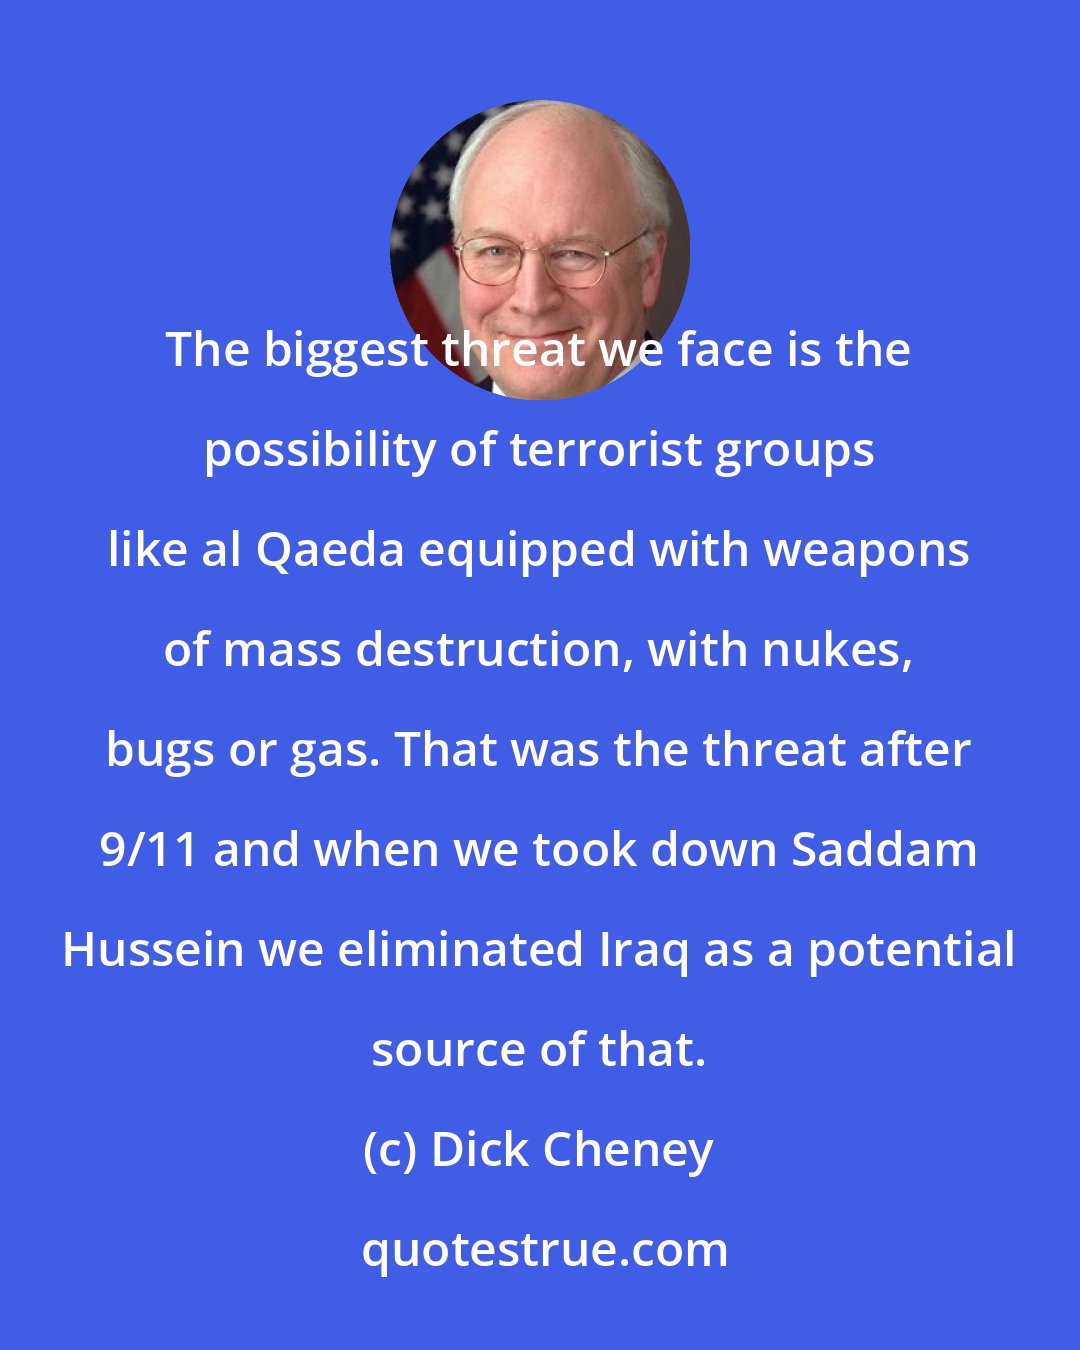 Dick Cheney: The biggest threat we face is the possibility of terrorist groups like al Qaeda equipped with weapons of mass destruction, with nukes, bugs or gas. That was the threat after 9/11 and when we took down Saddam Hussein we eliminated Iraq as a potential source of that.